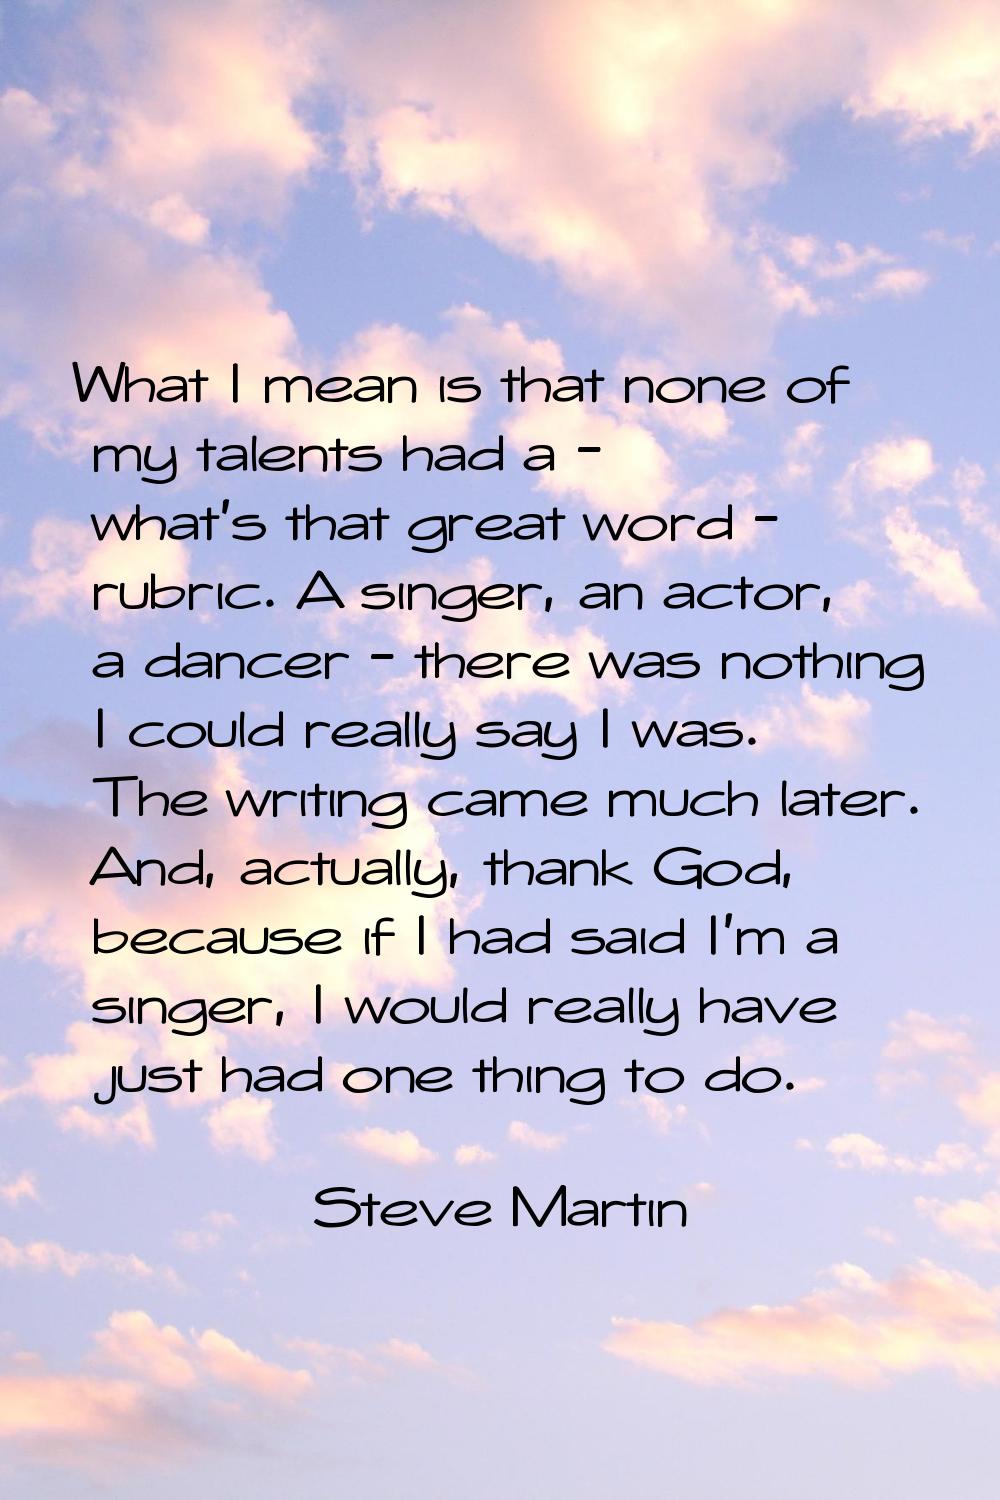 What I mean is that none of my talents had a - what's that great word - rubric. A singer, an actor,